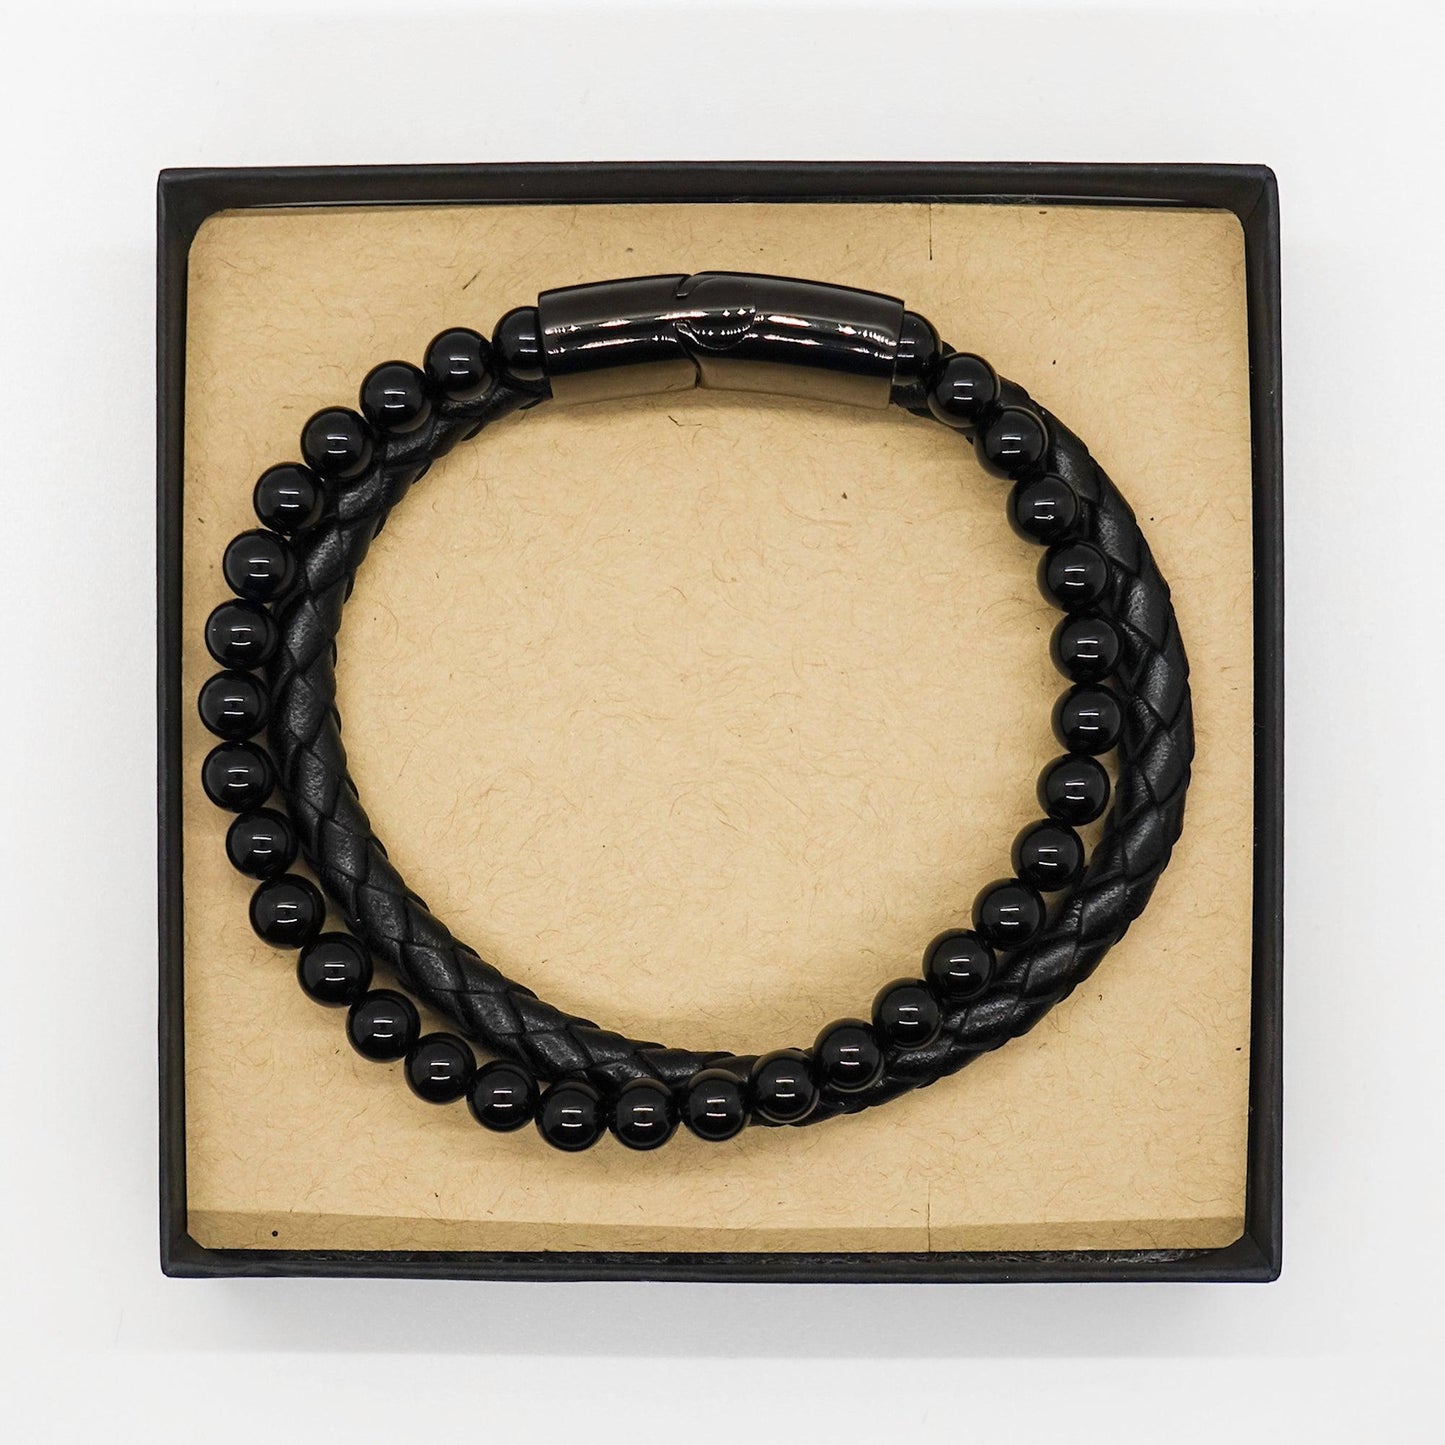 Surveyor Black Braided Leather Stone Bracelet - Thanks for being who you are - Birthday Christmas Jewelry Gifts Coworkers Colleague Boss - Mallard Moon Gift Shop